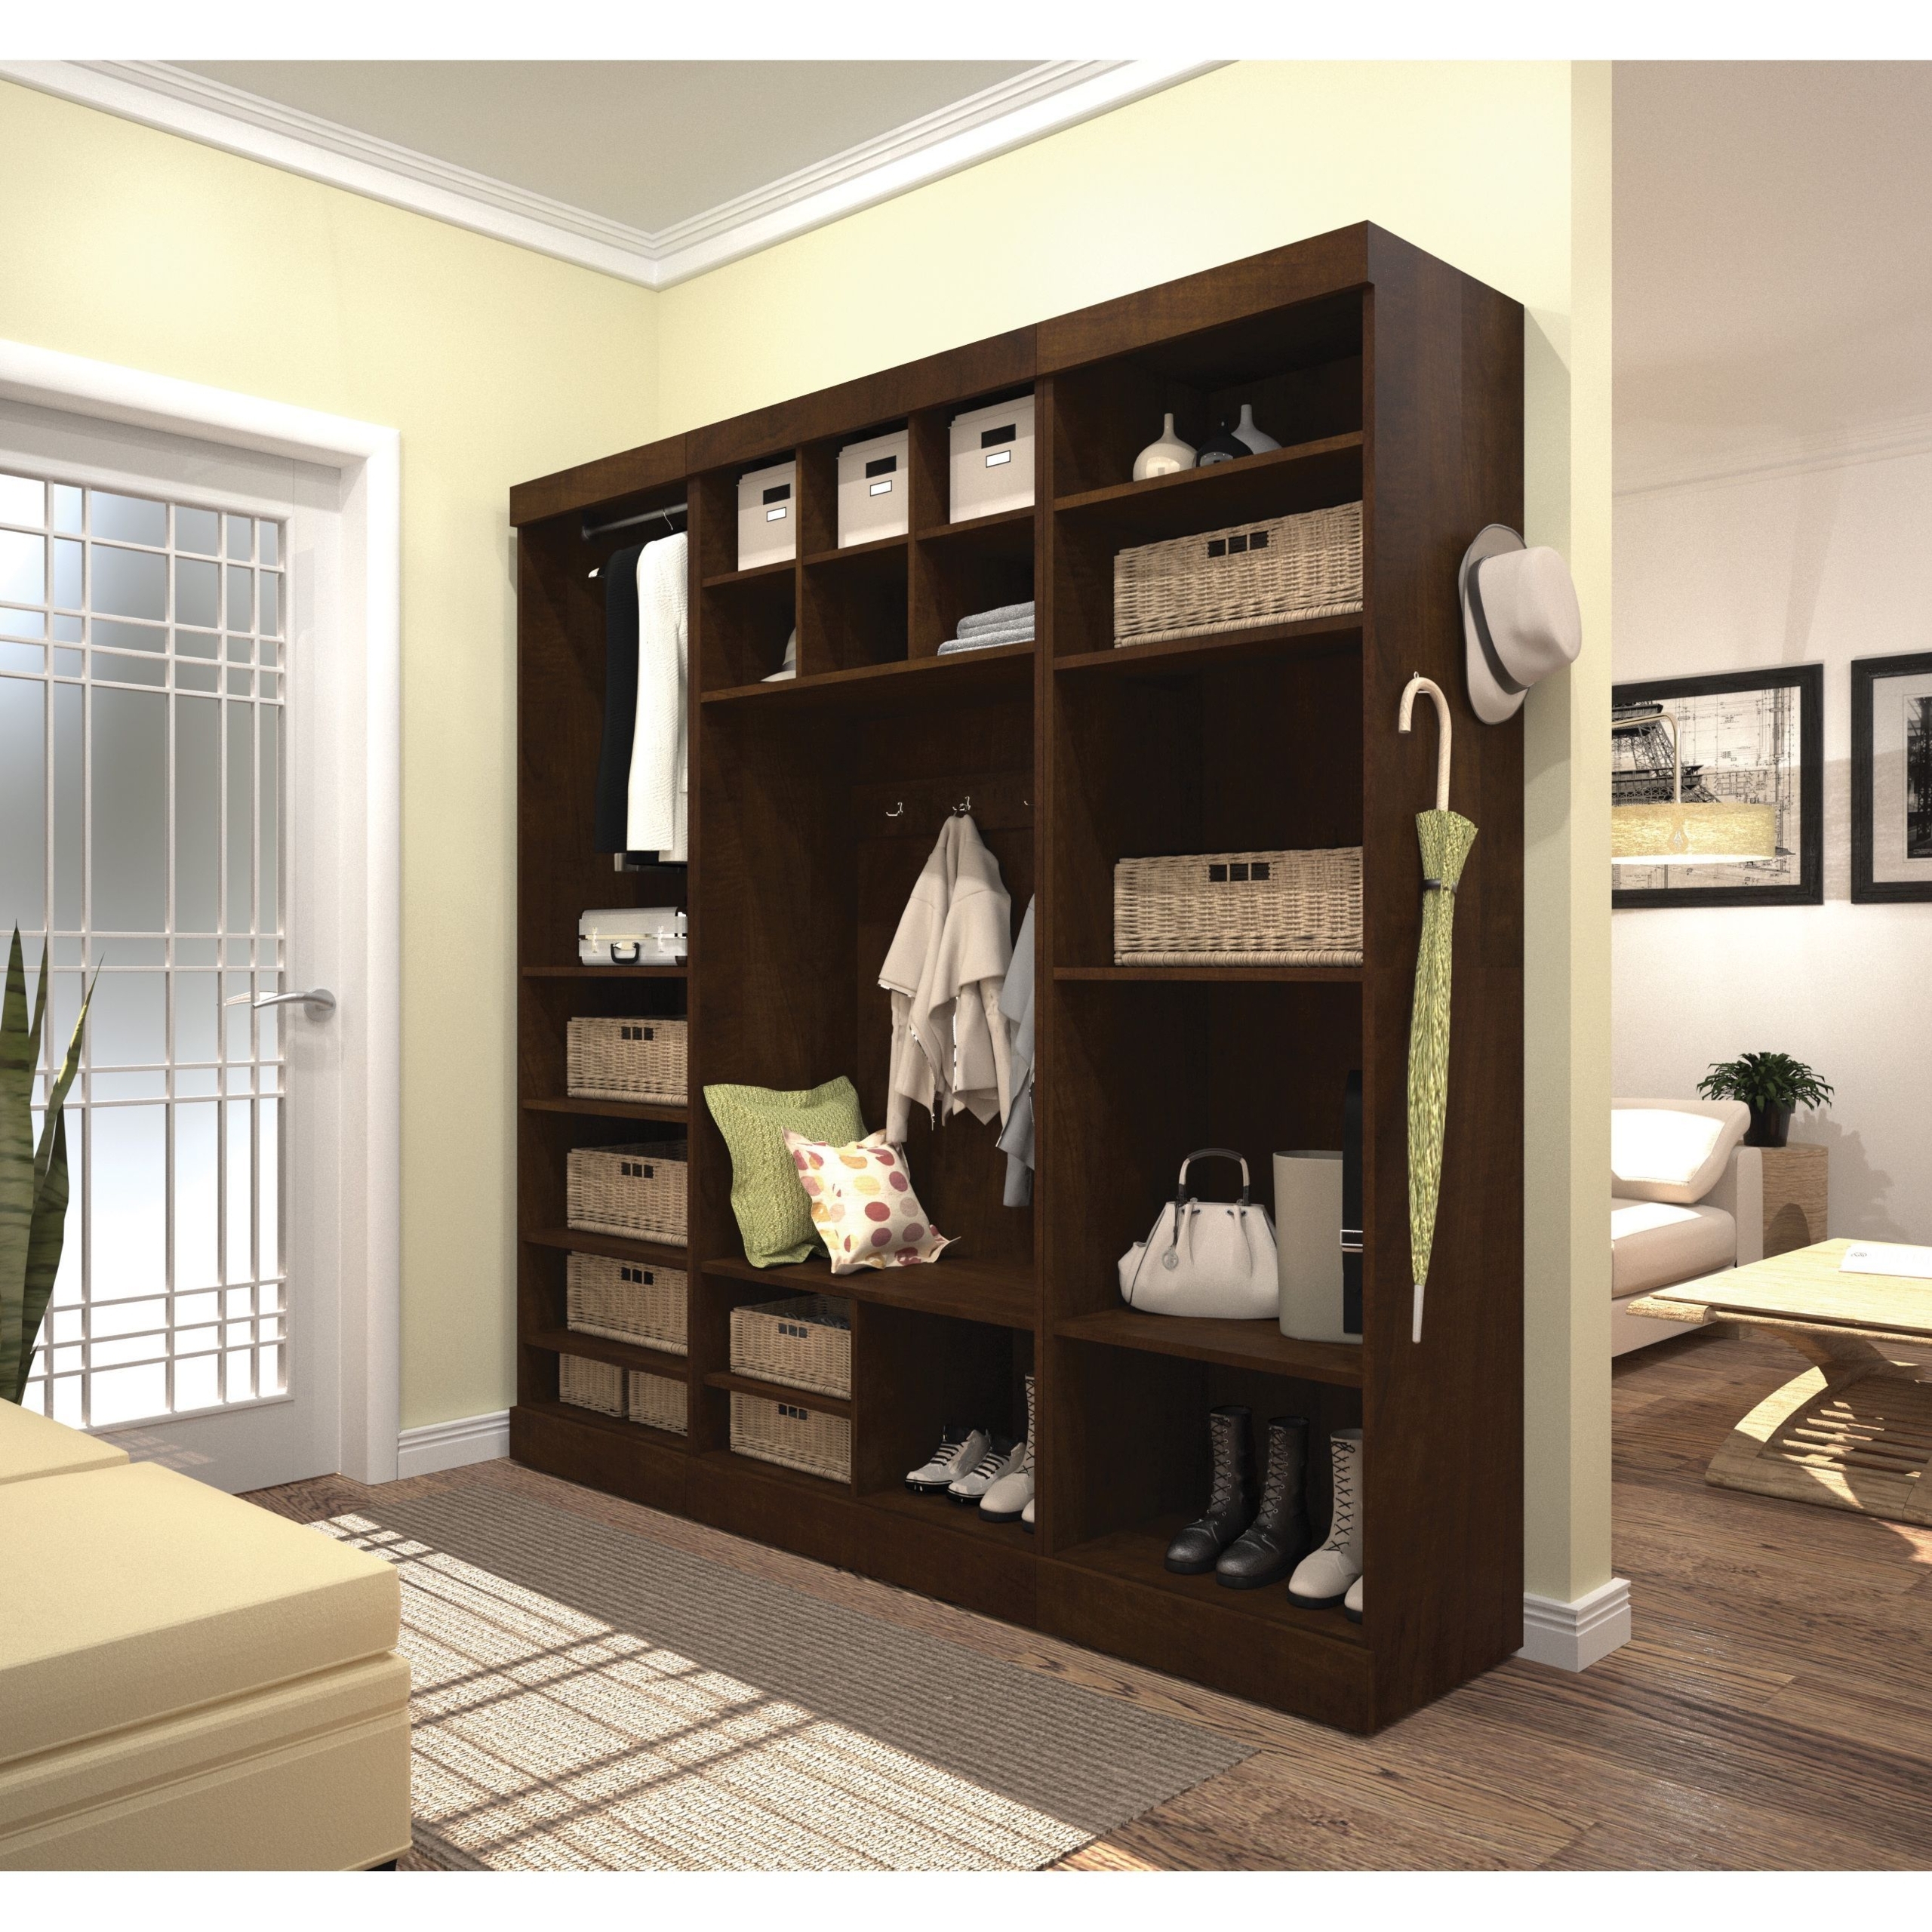 How To Choose The Right Closet Organizer For Your Space – Closets By Liberty